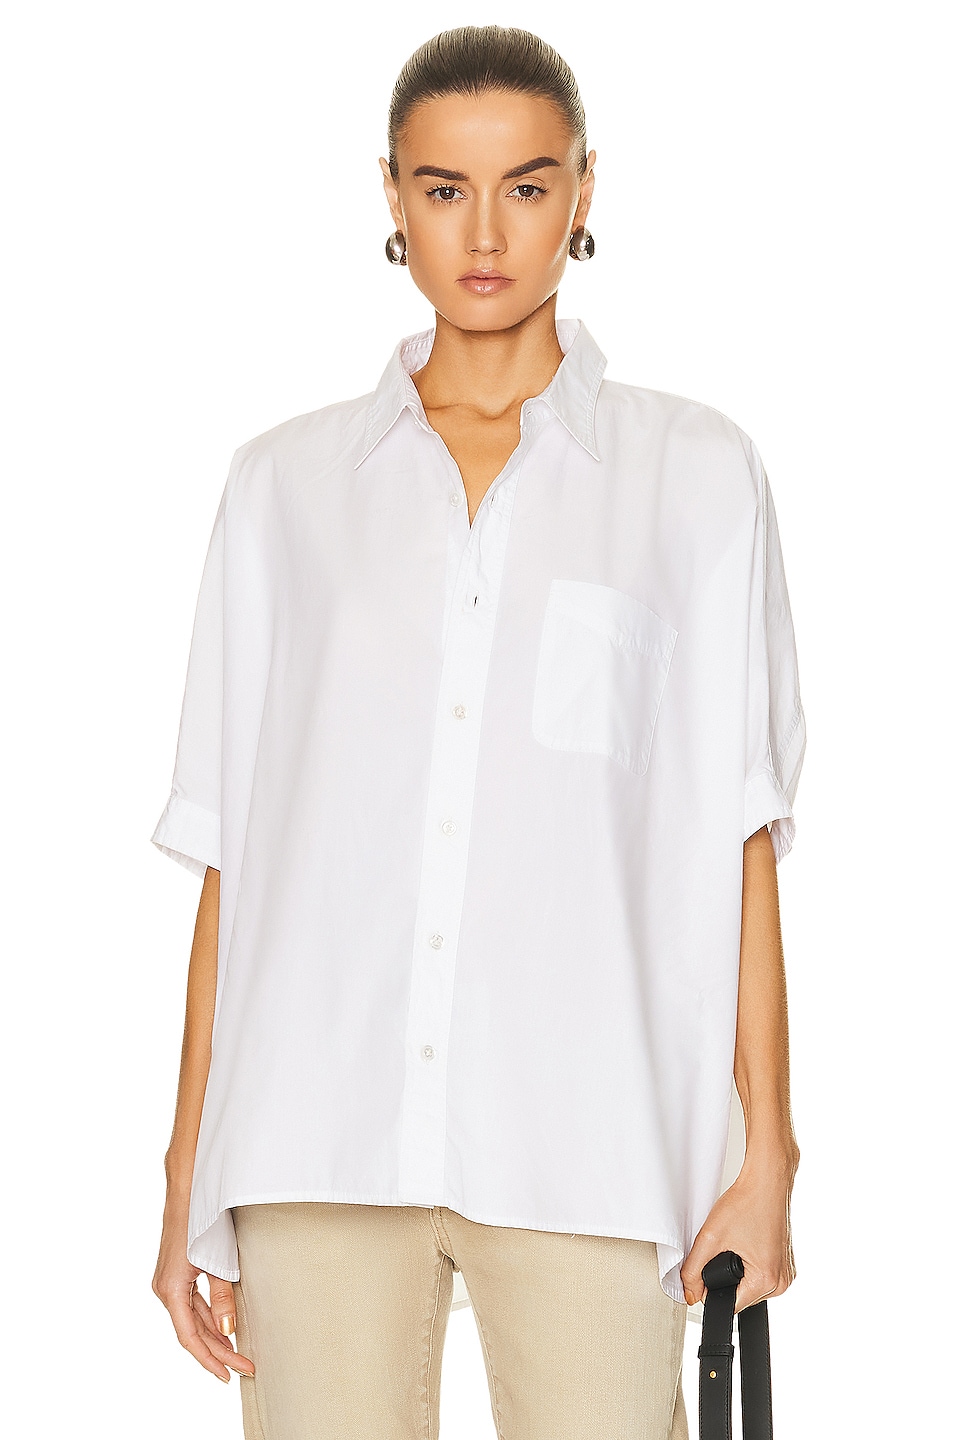 R13 Oversized Boxy Button Up Shirt in White | FWRD